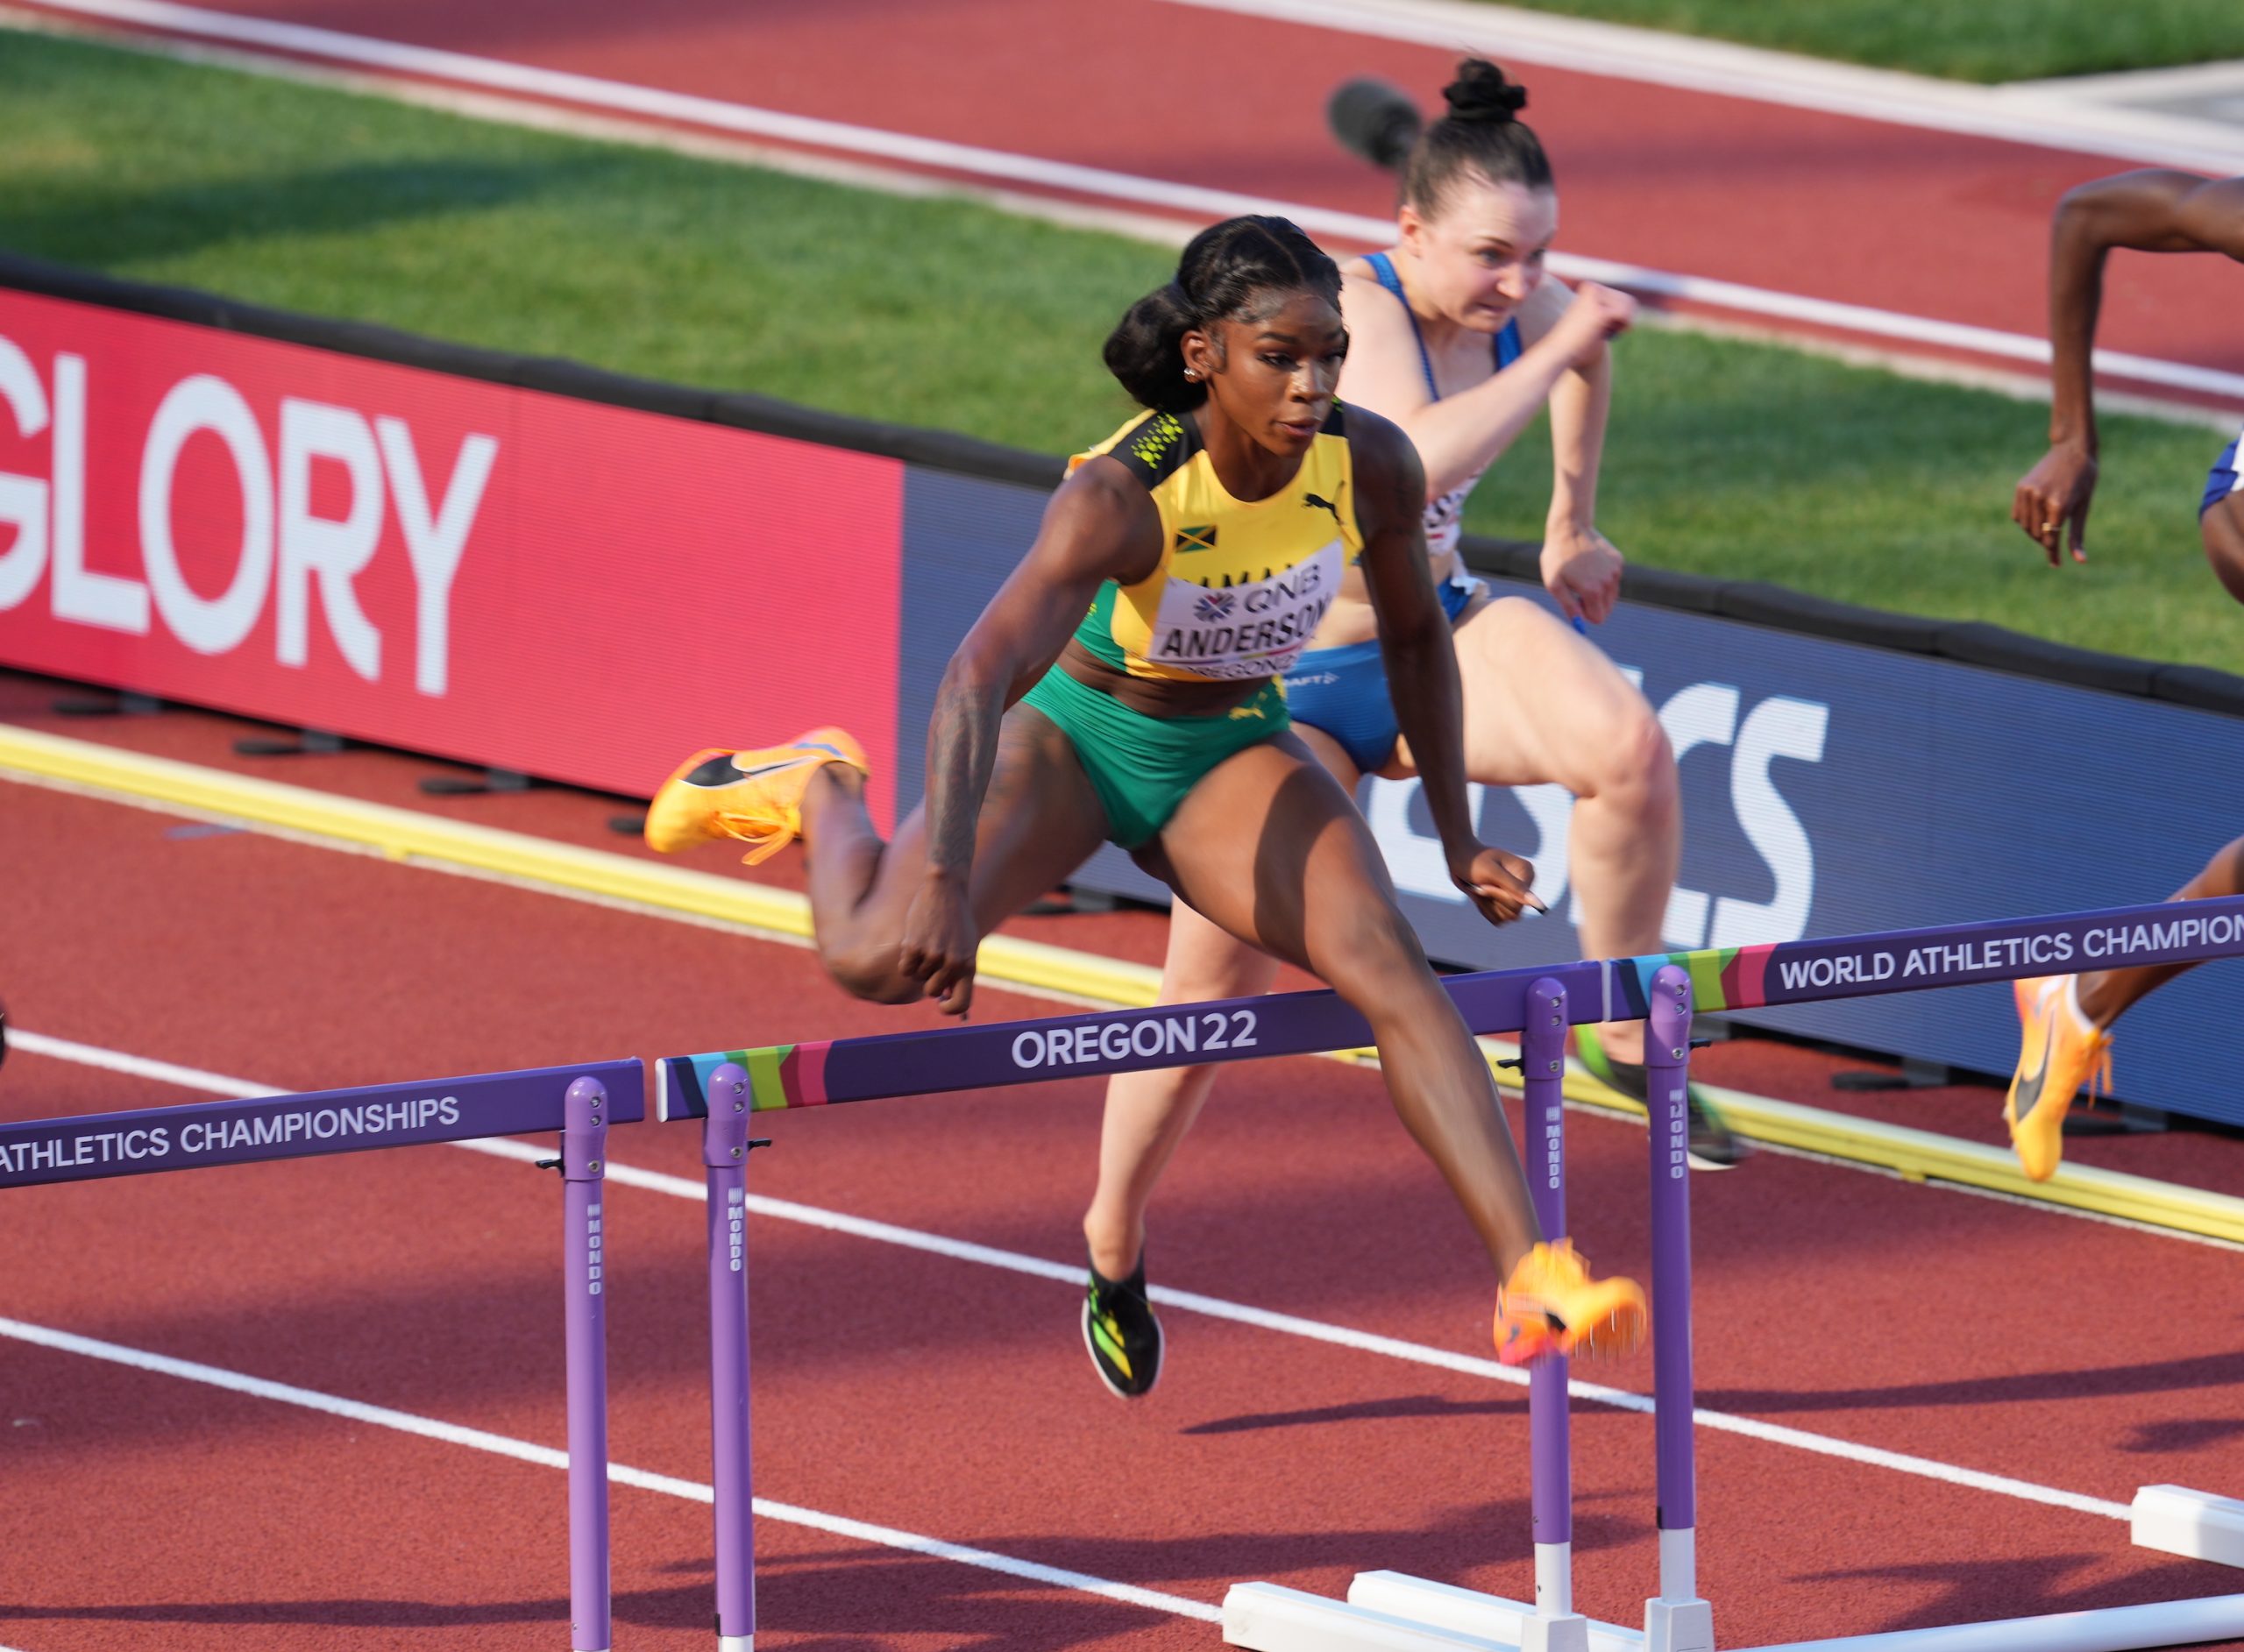 Britany Anderson runs a new Jamaica record of 12.31 to qualify for the final of the women's 100m hurdles at the Oregon22 World Athletics Championships